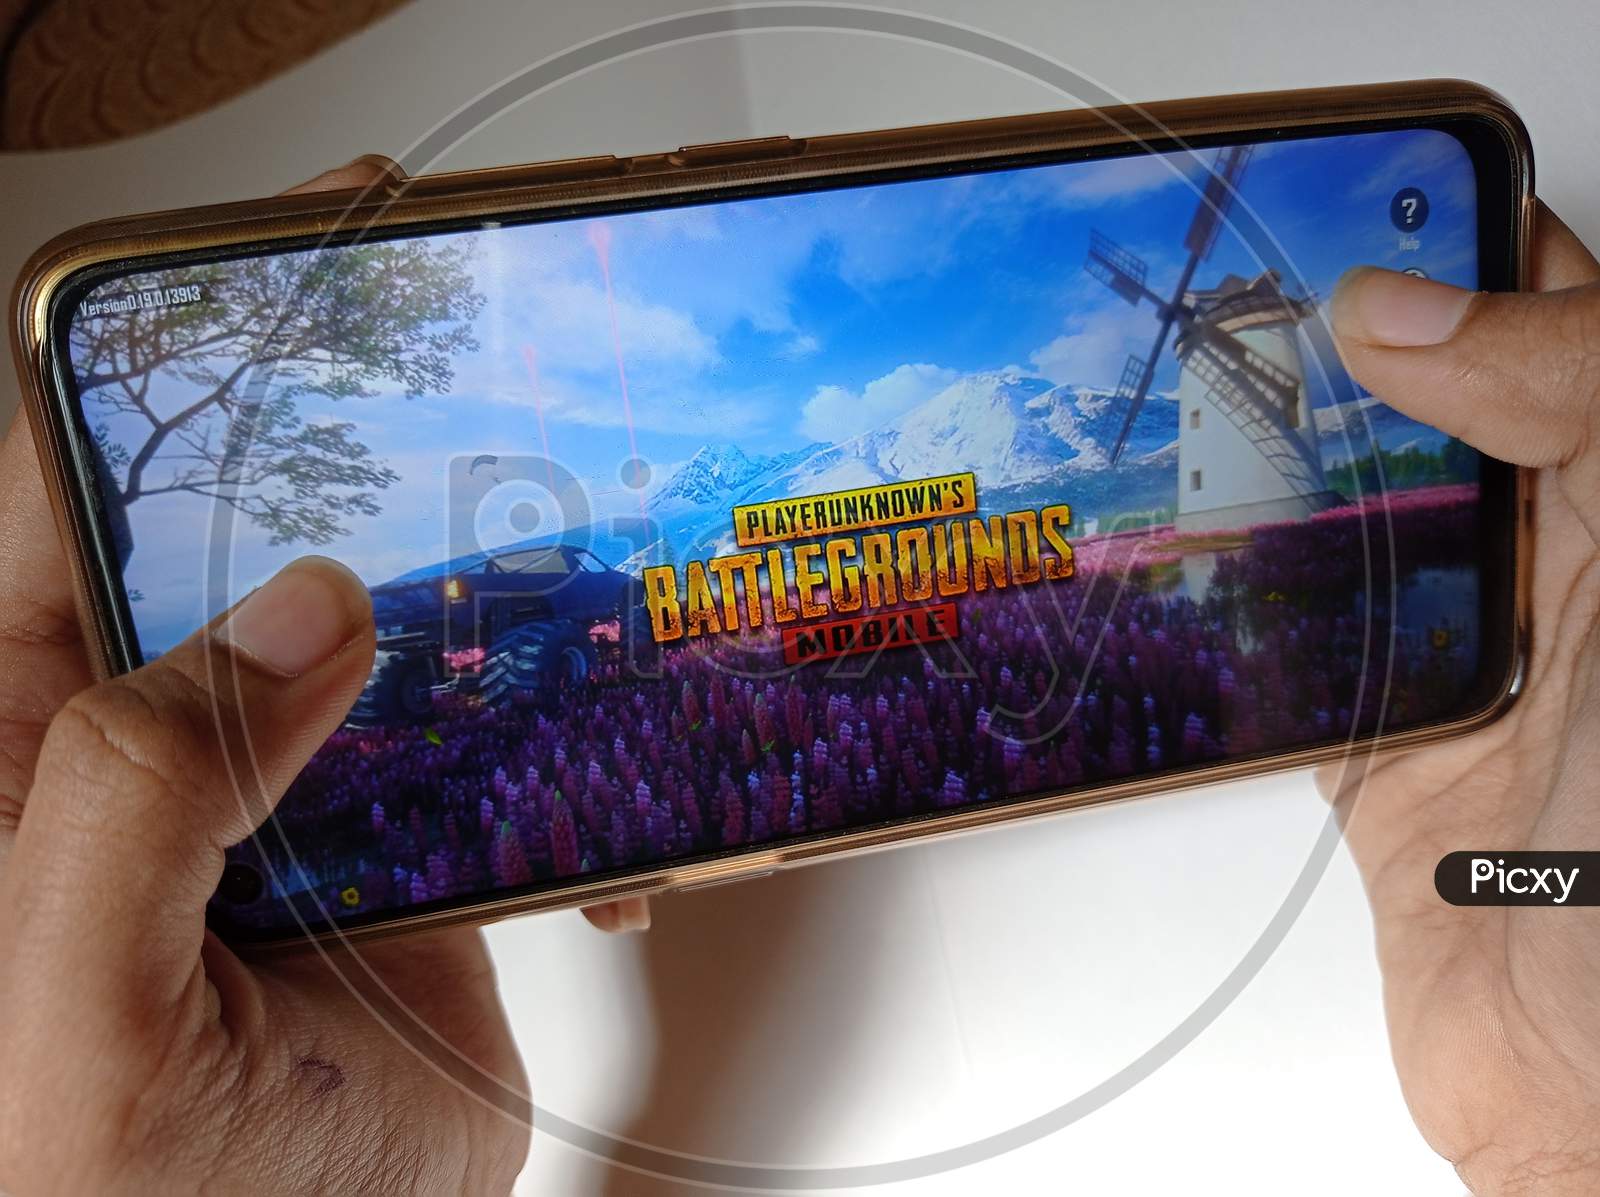 Indian government ban pubg mobile in India